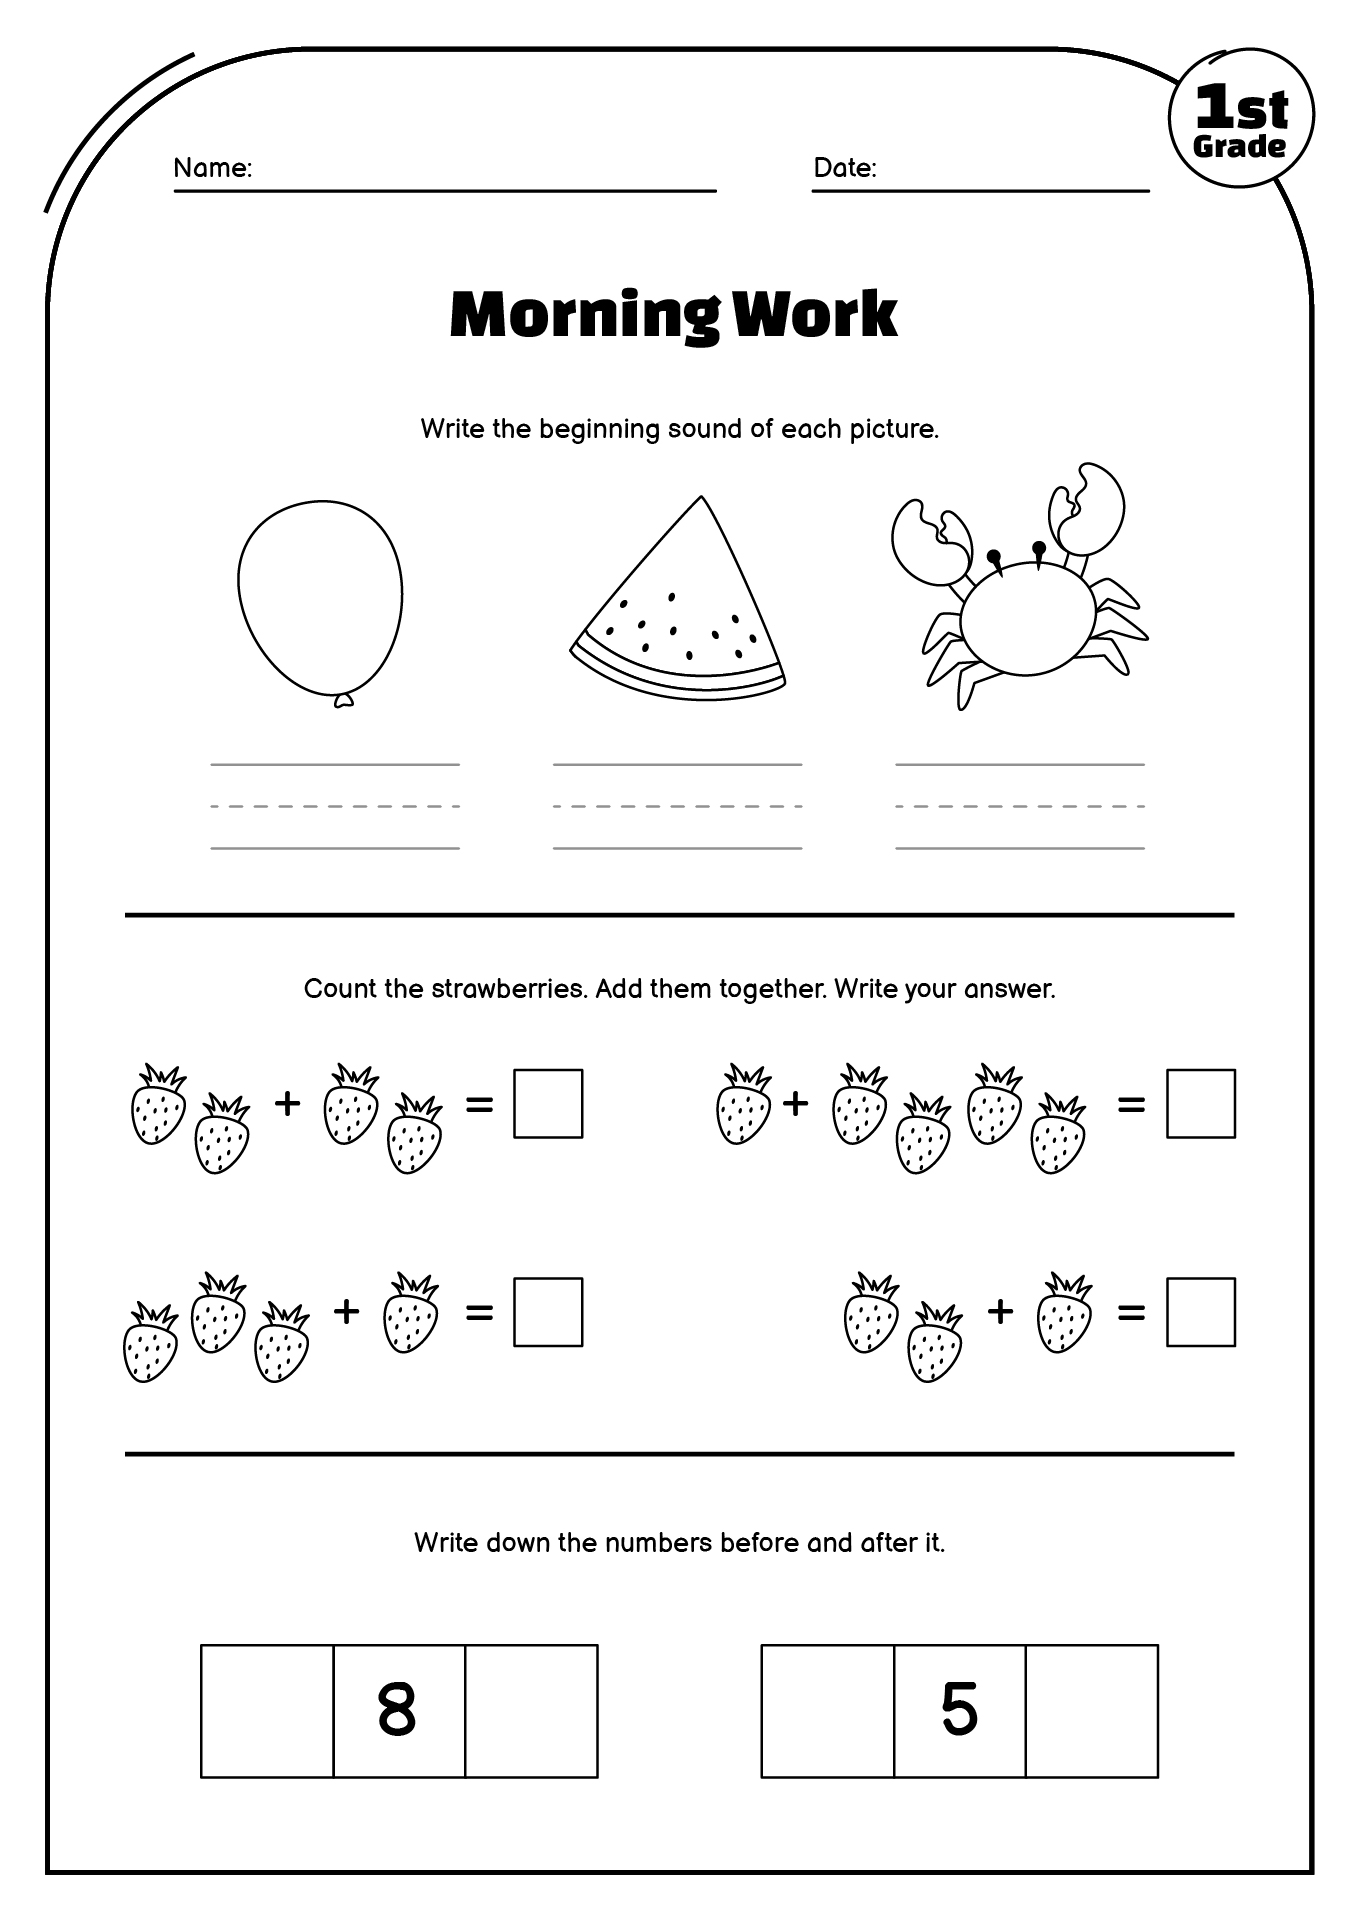 1st Grade Morning Work Practice Sheets